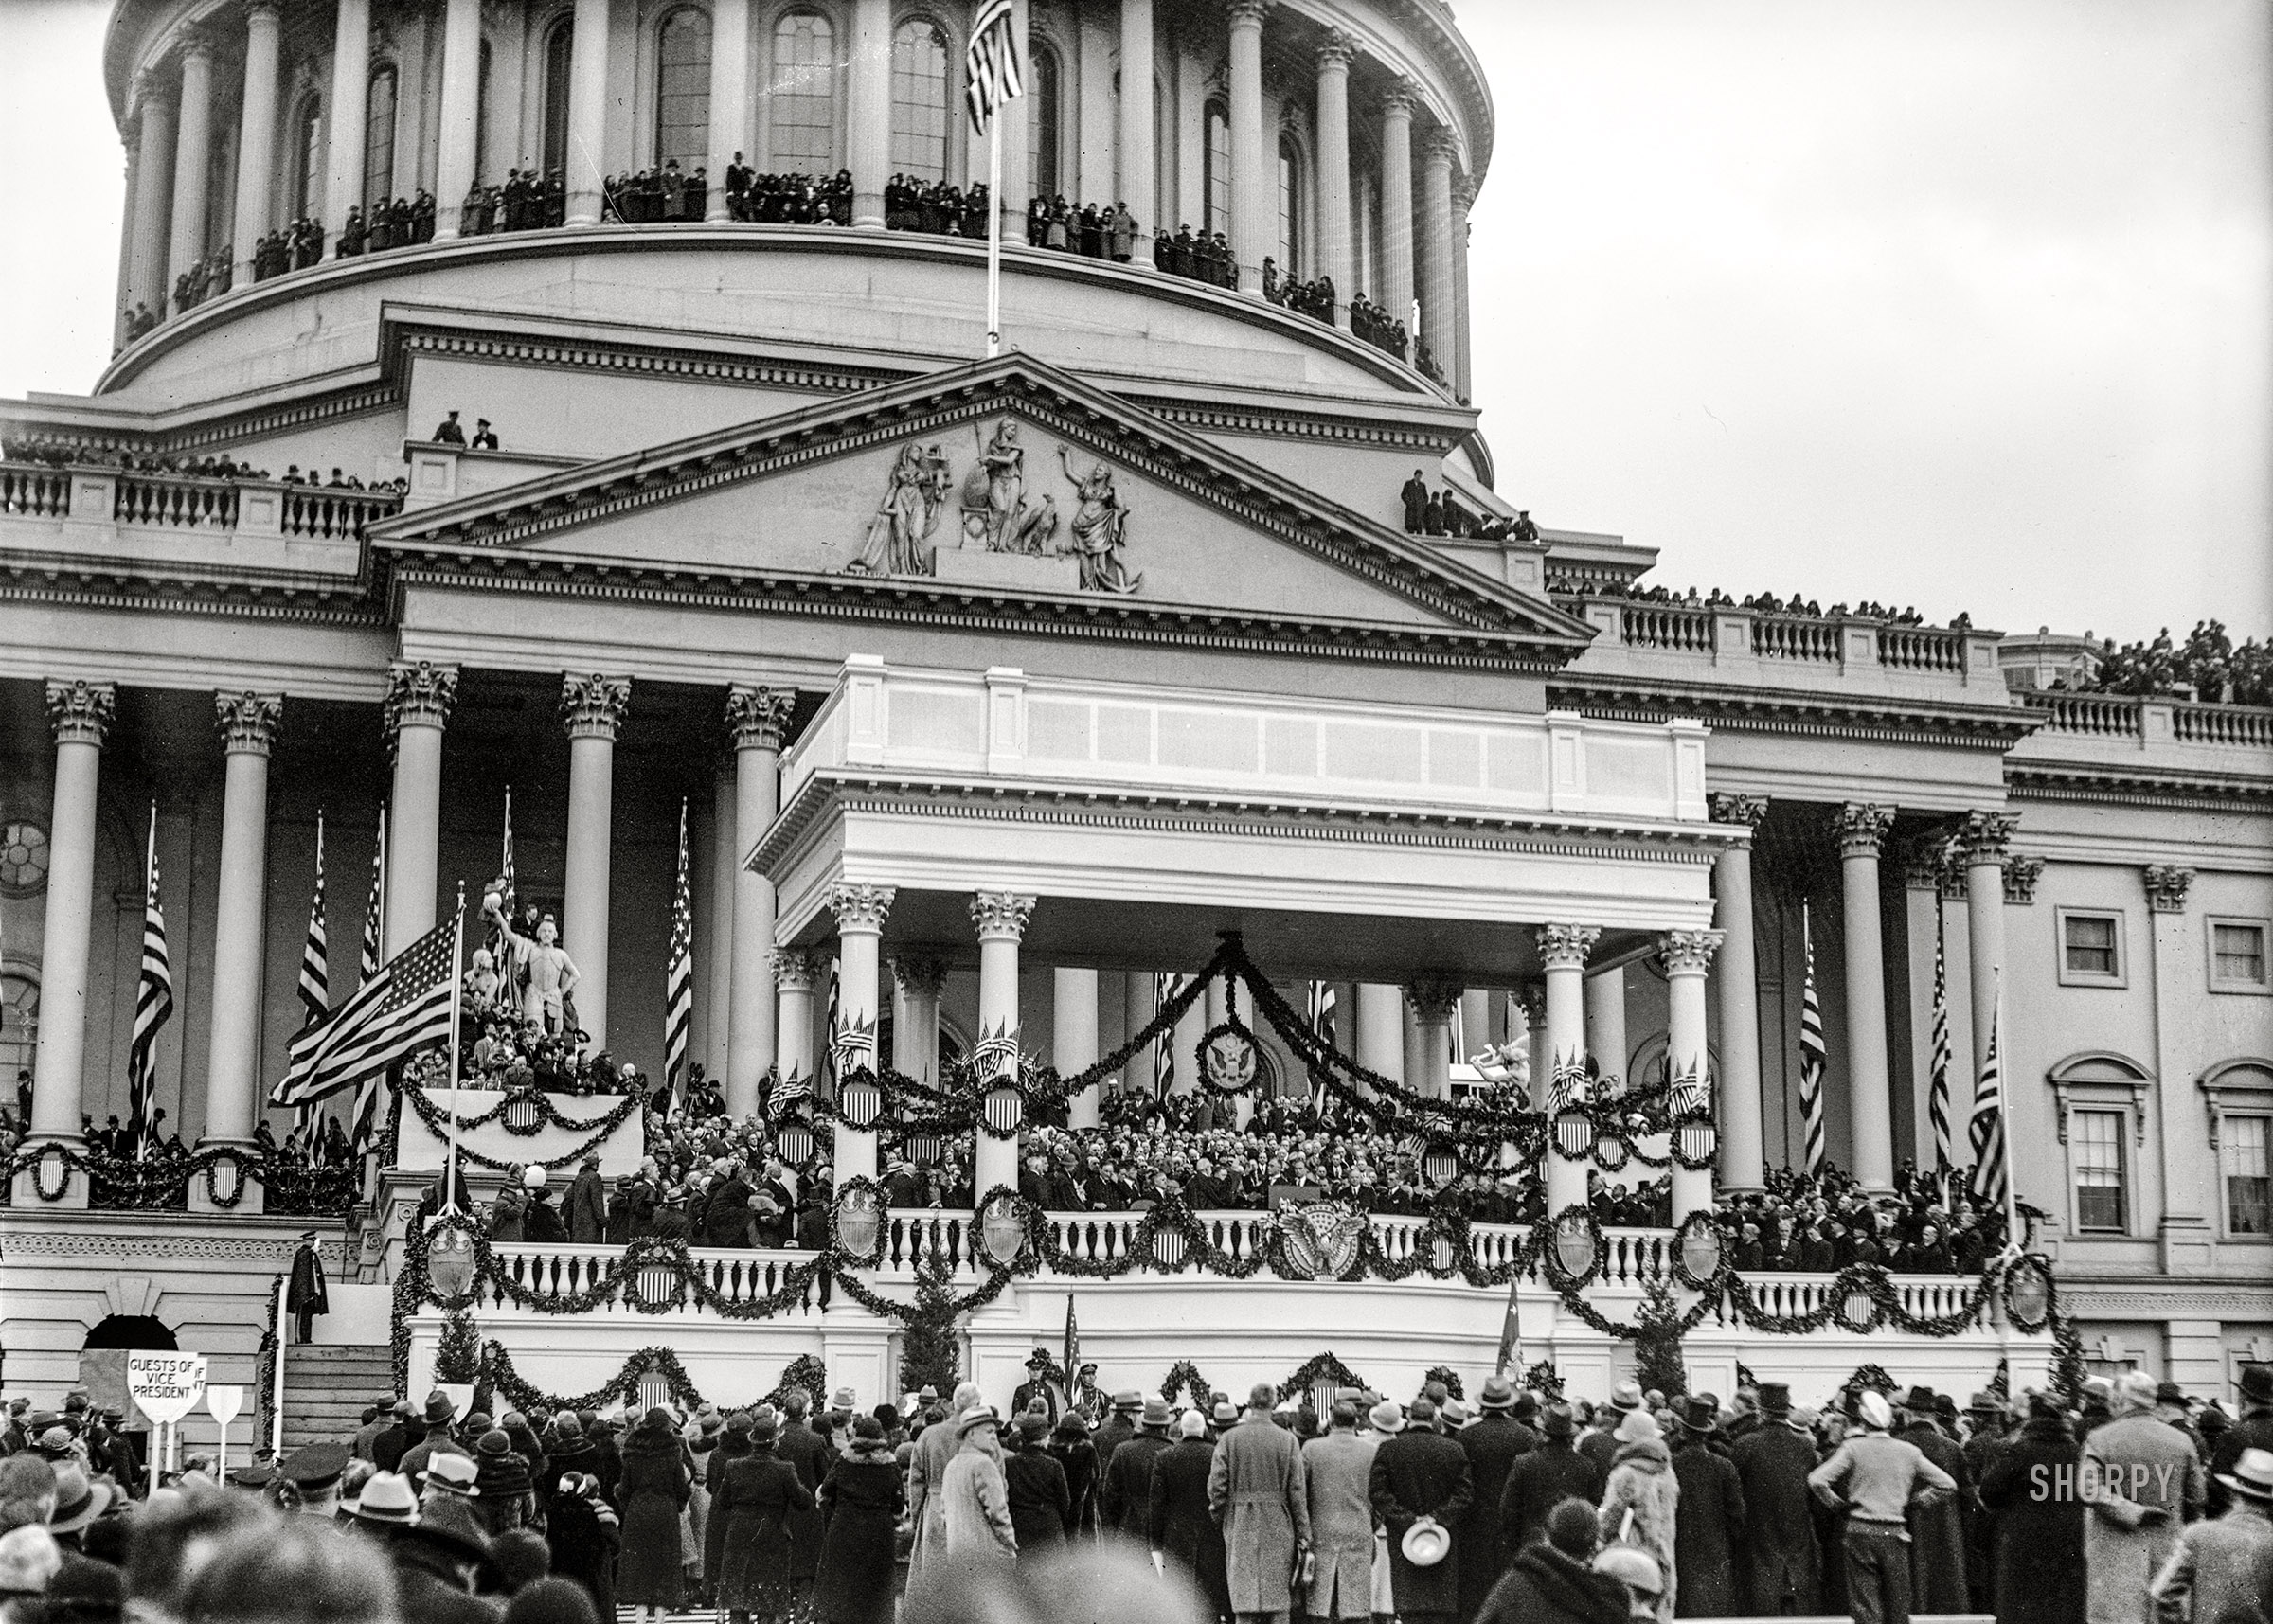 March 4, 1933. "Inauguration of Franklin D. Roosevelt as President and John Nance Garner as Vice President. Podium at U.S. Capitol East Portico, Washington, D.C." This 37th presidential inauguration, the first of four for FDR, was the last to be held in March before Inauguration Day was moved to January by the 20th Amendment. Harris & Ewing glass negative. View full size.